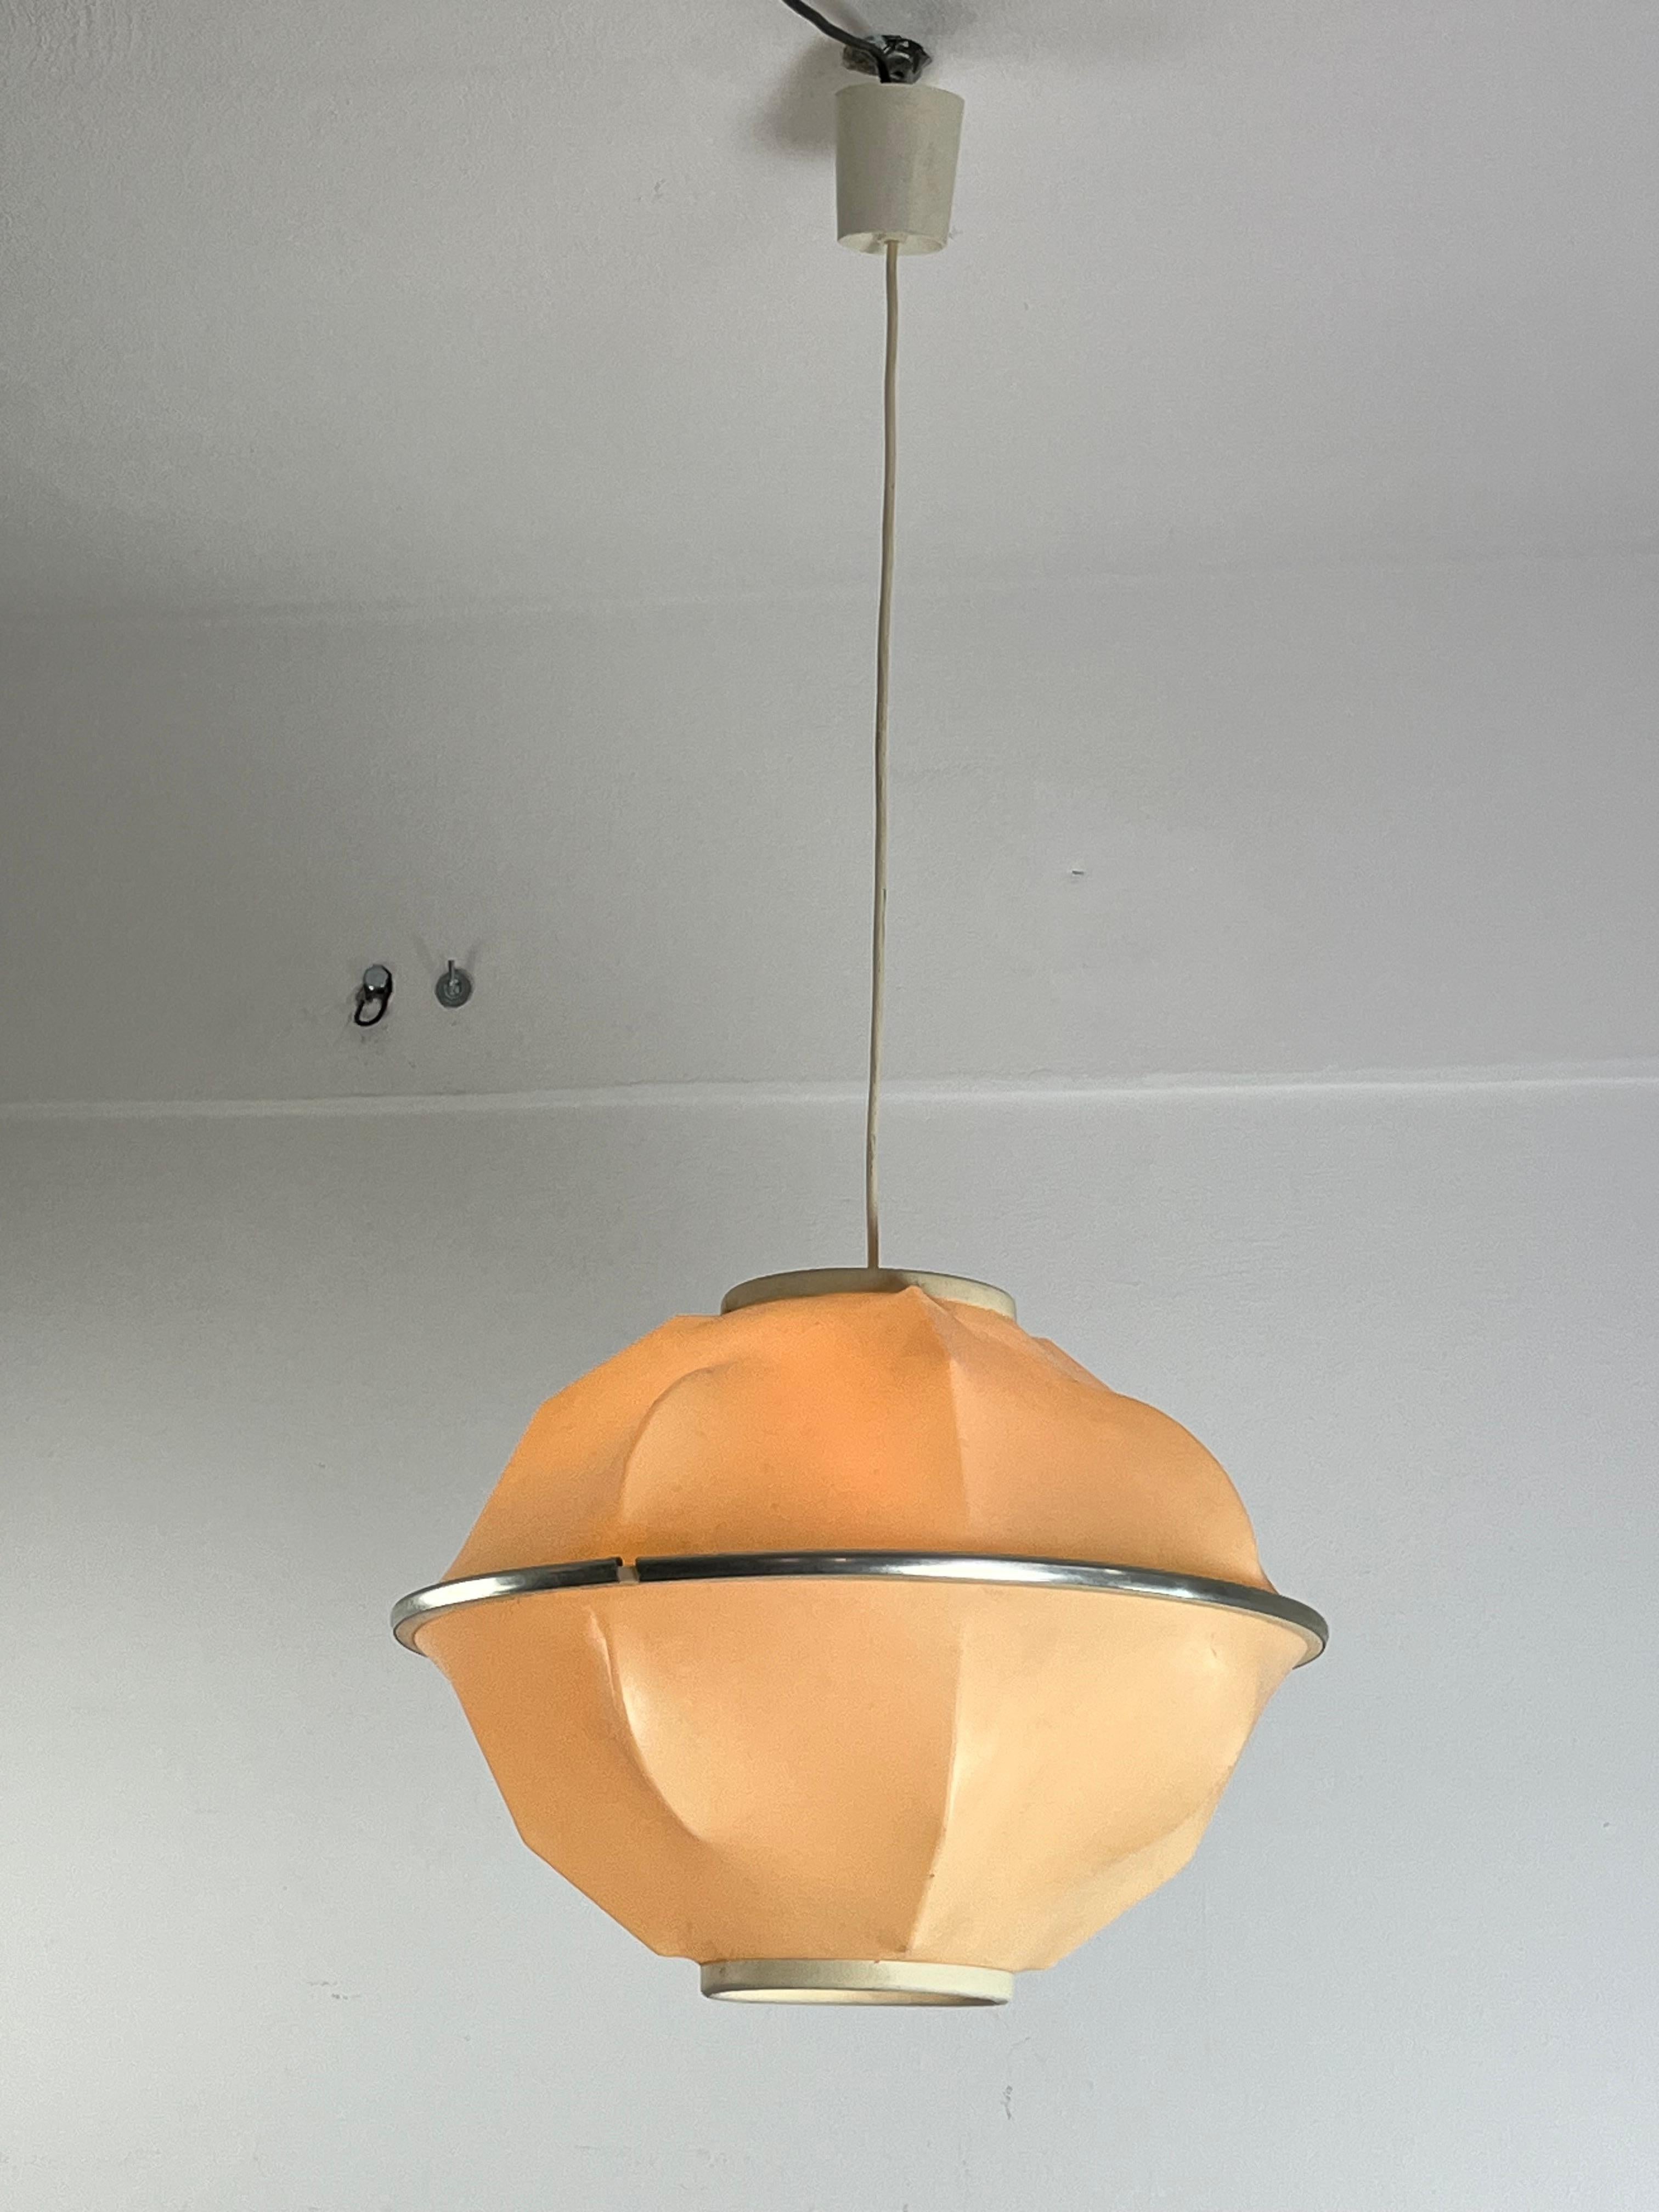 Metal Mid-Century Modern Pendant Lamp Designed & Manufactered Probably By Flos 1960s For Sale